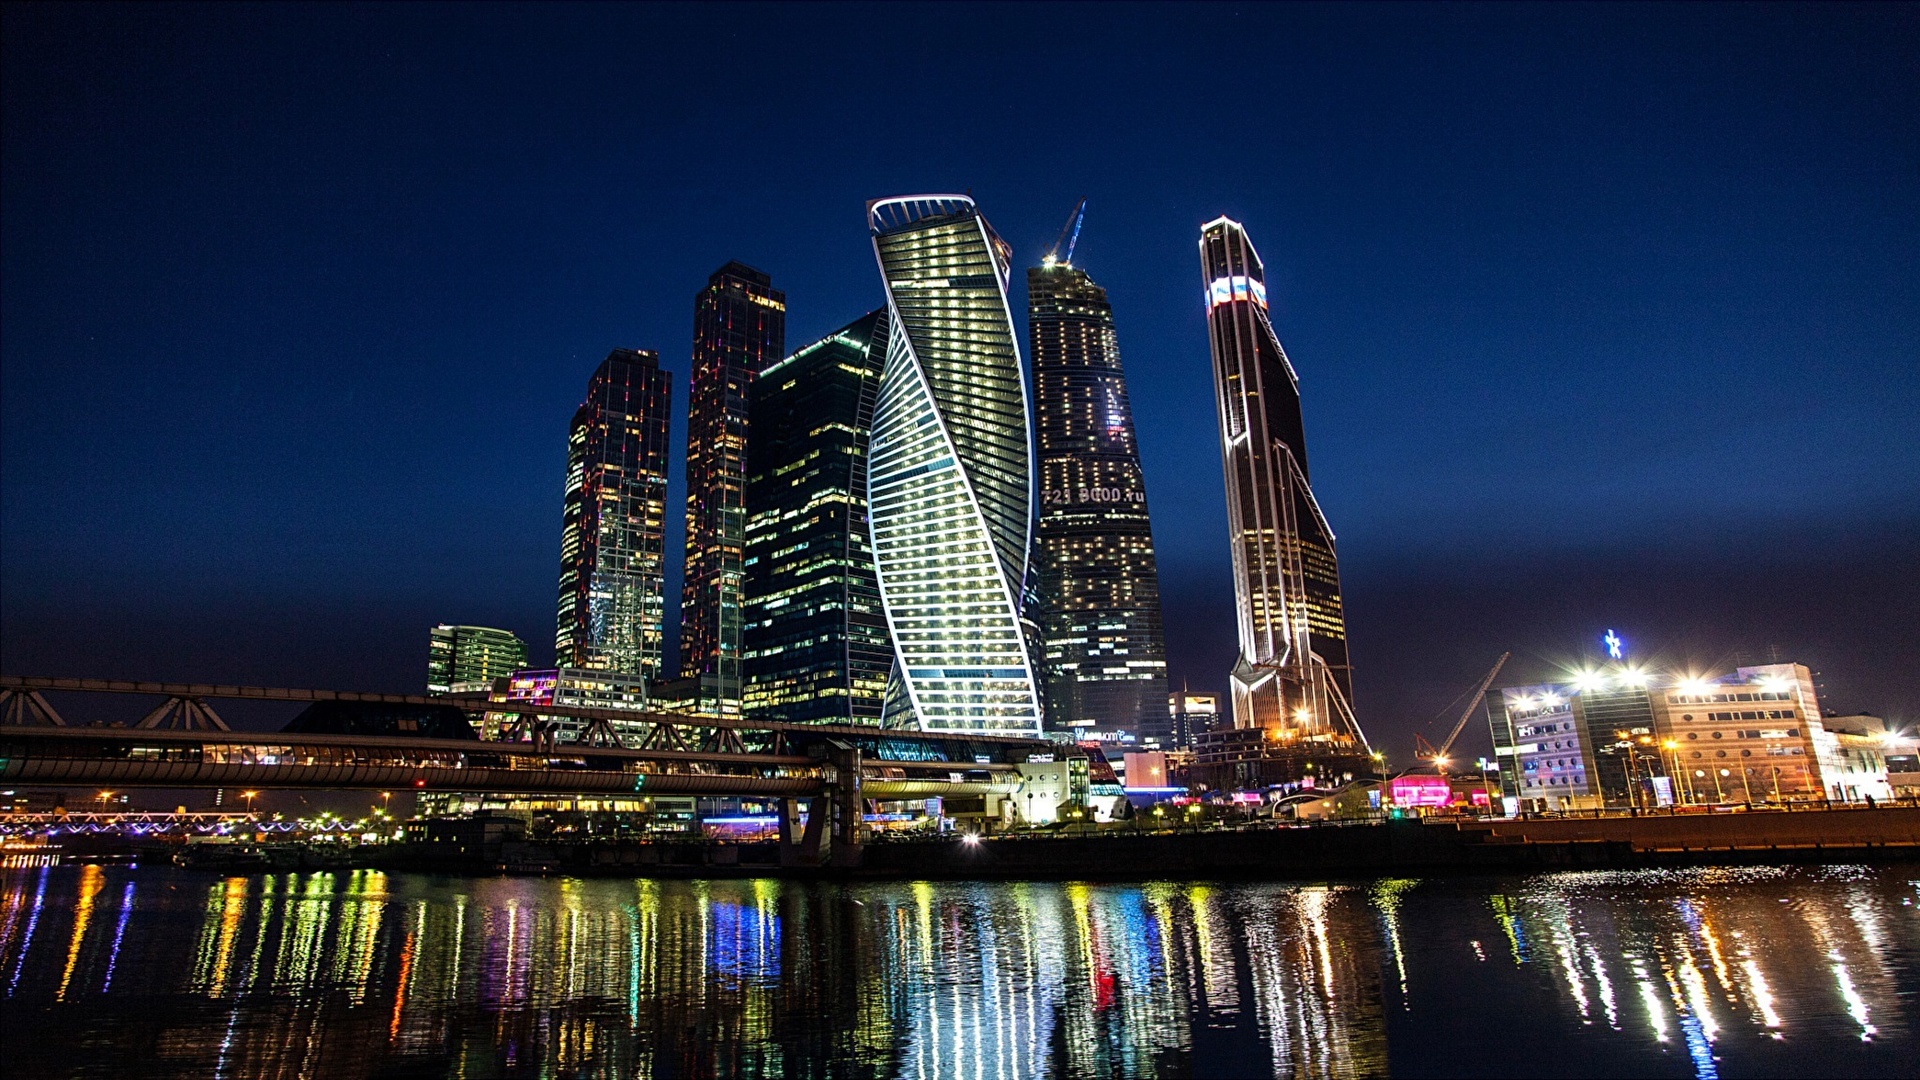 Desktop Wallpapers Moscow Russia Night Rivers Skyscrapers 1920x1080